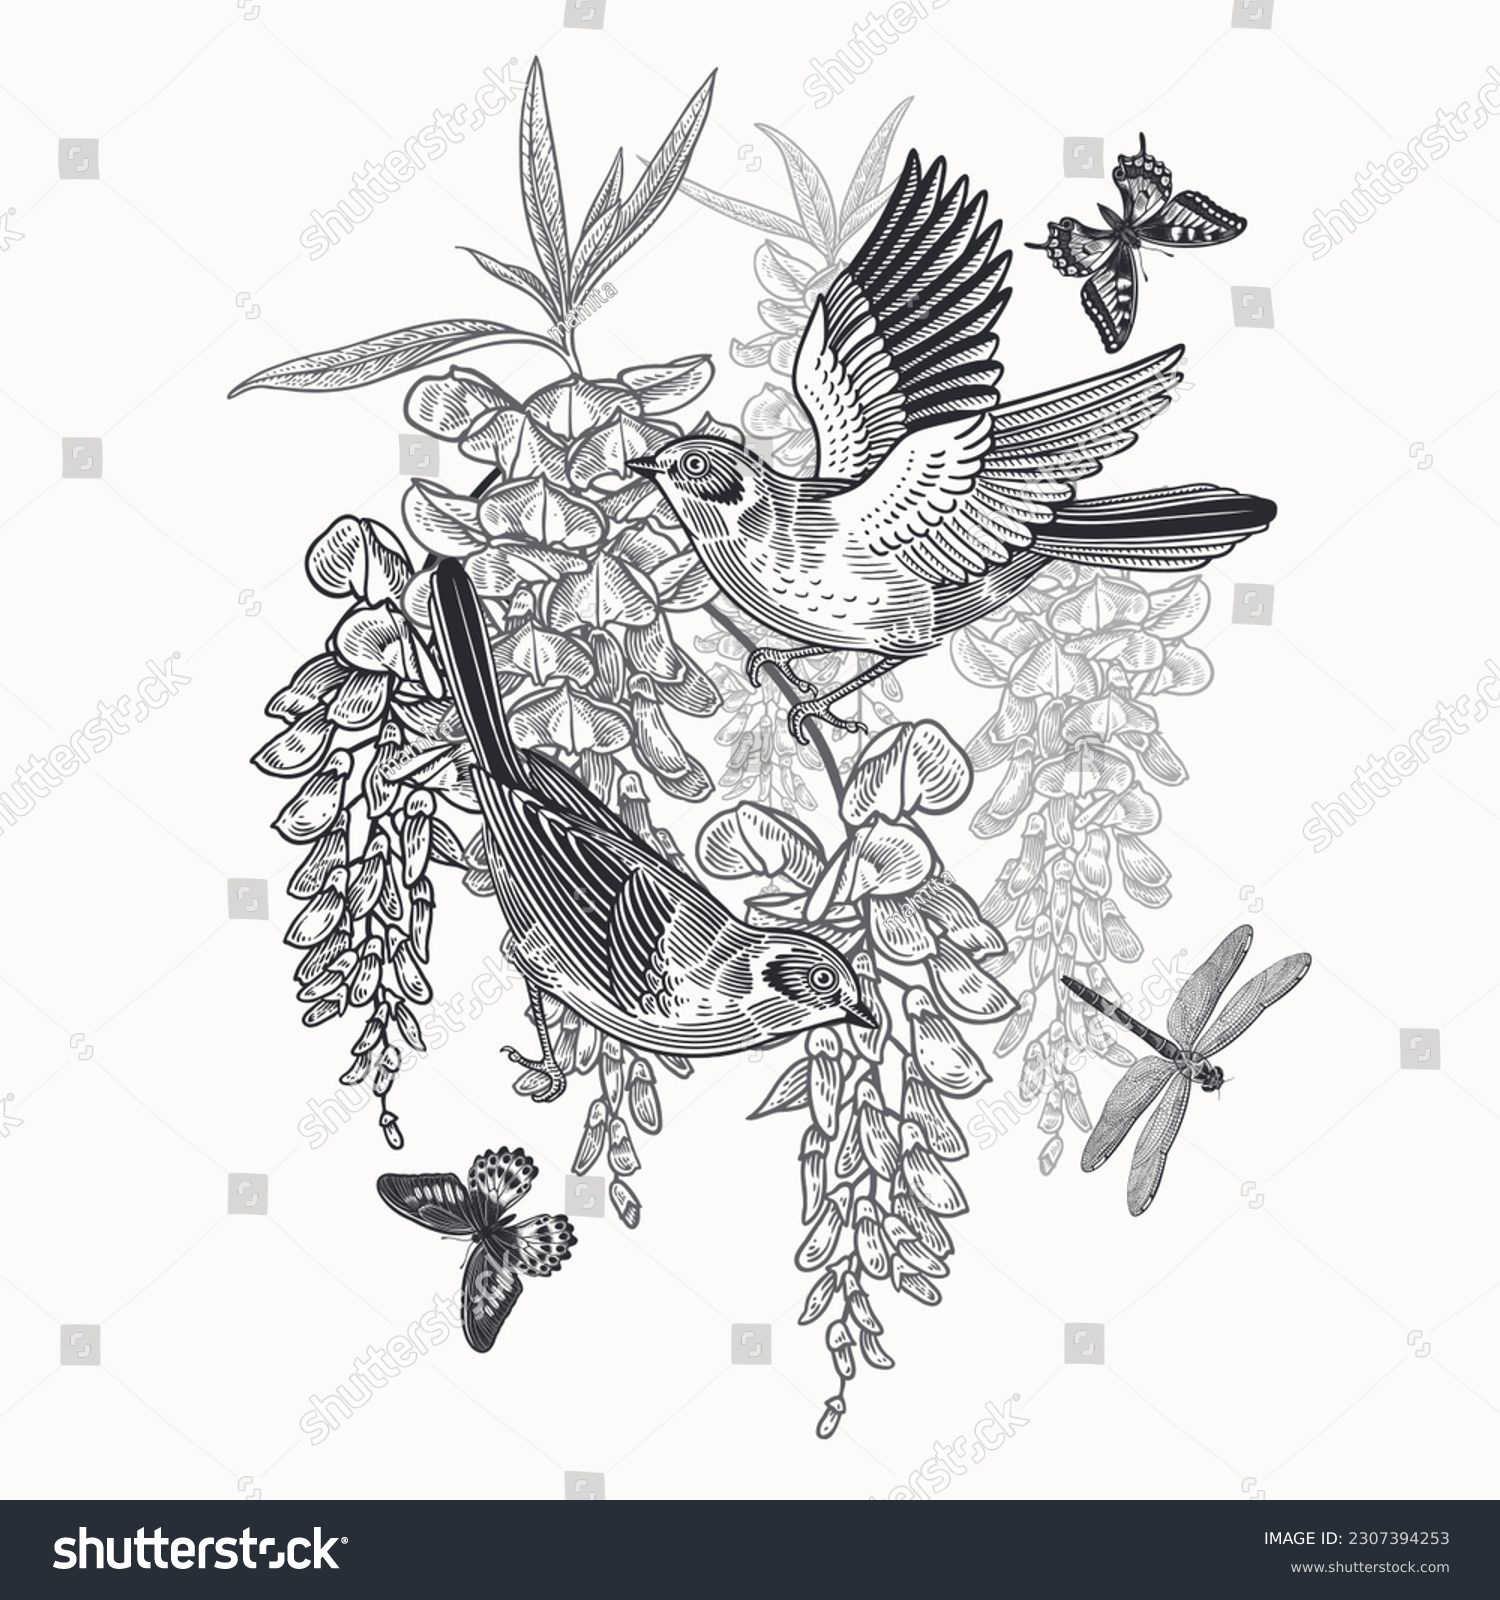 SVG of Wedding card. Cute birds, butterflies and dragonfly on the branches of tree. Floral pattern.  Wisteria liana Japanese flowers. Black and white. Vector illustration. Vintage decor. svg